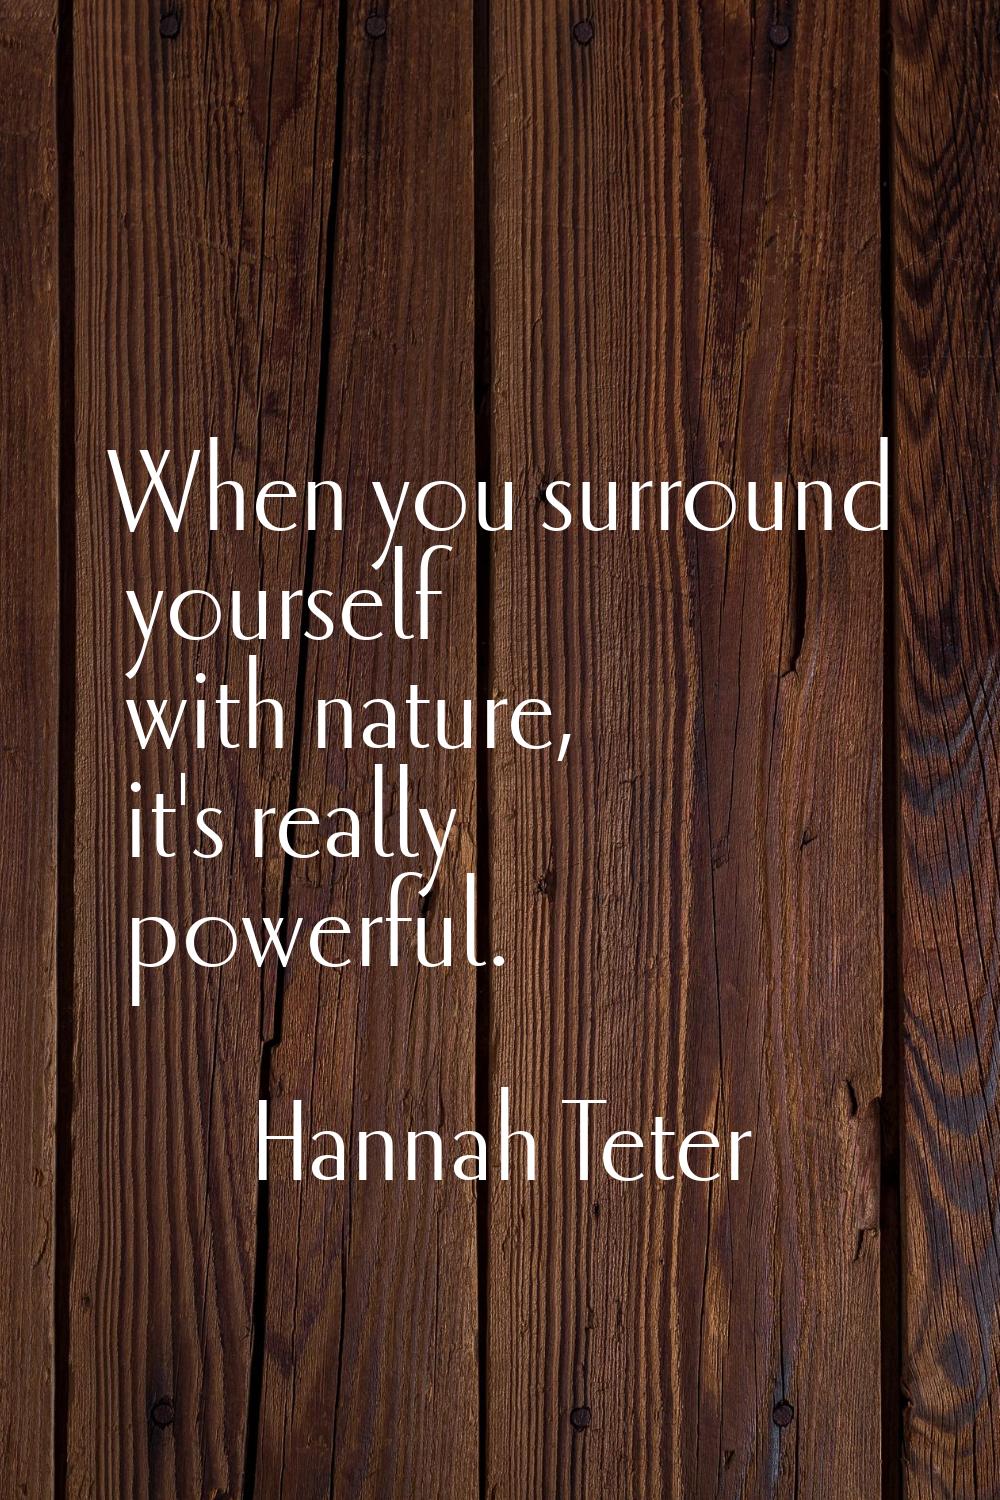 When you surround yourself with nature, it's really powerful.